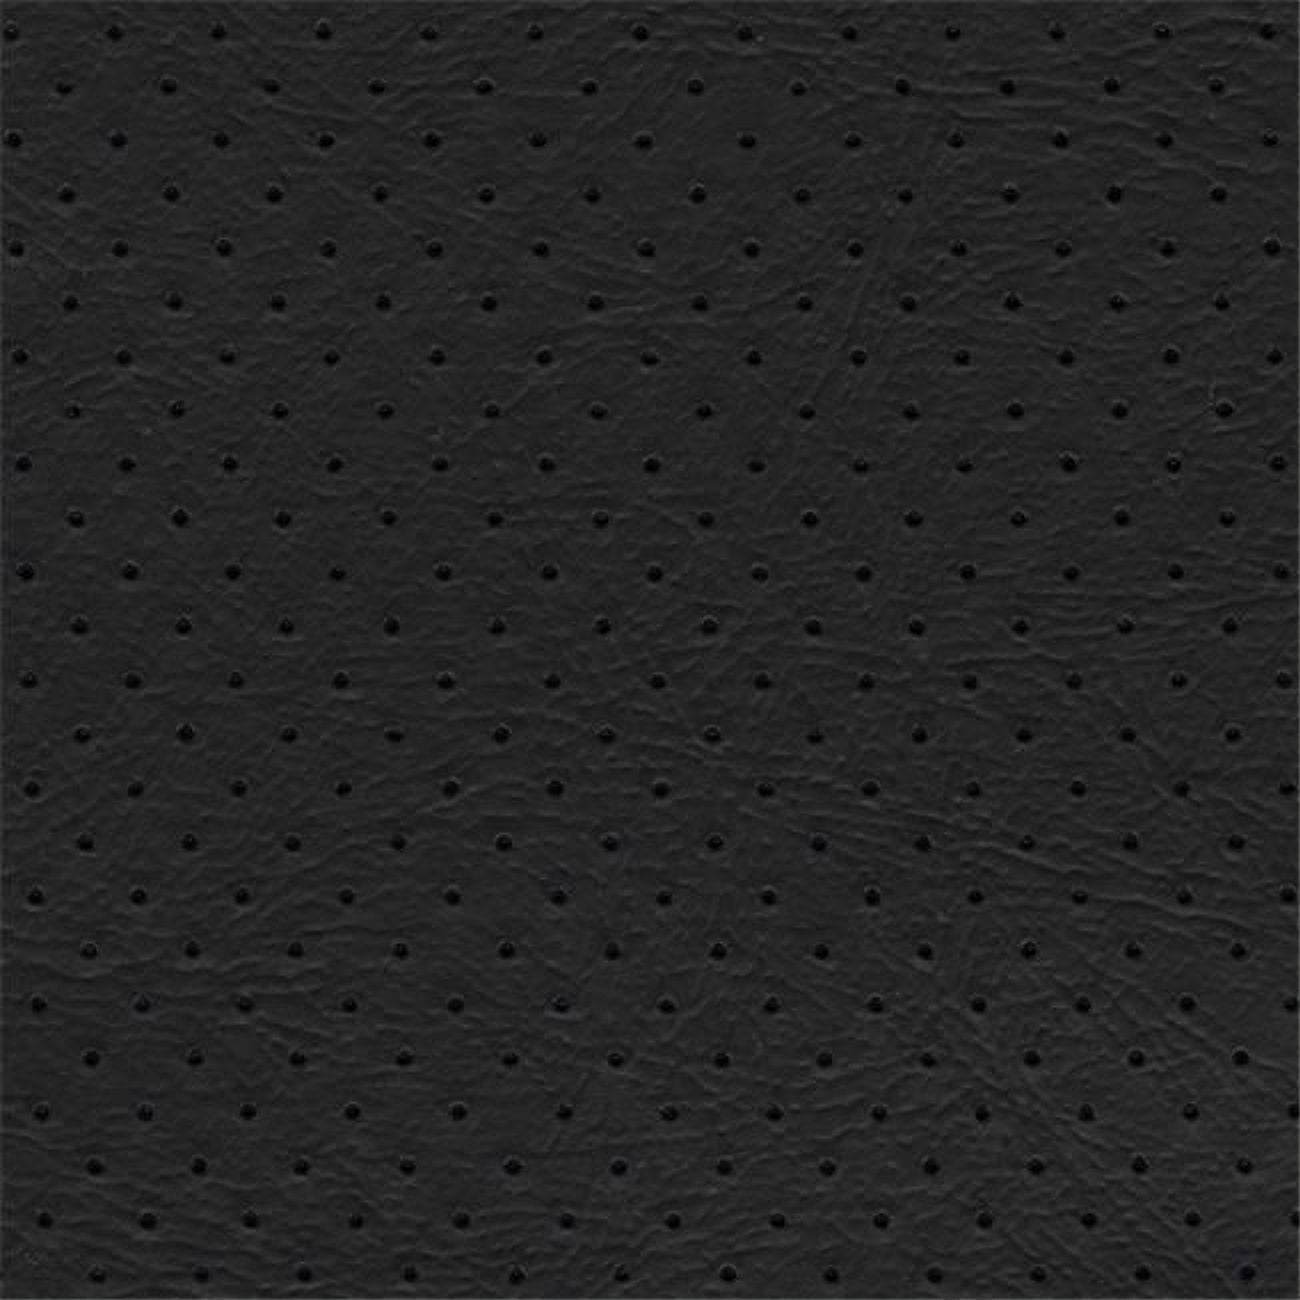 EdgeSeal Synthetic Leather Fabric Upholstery Vinyl Material for Auto Seat  Replace Handmade DIY 